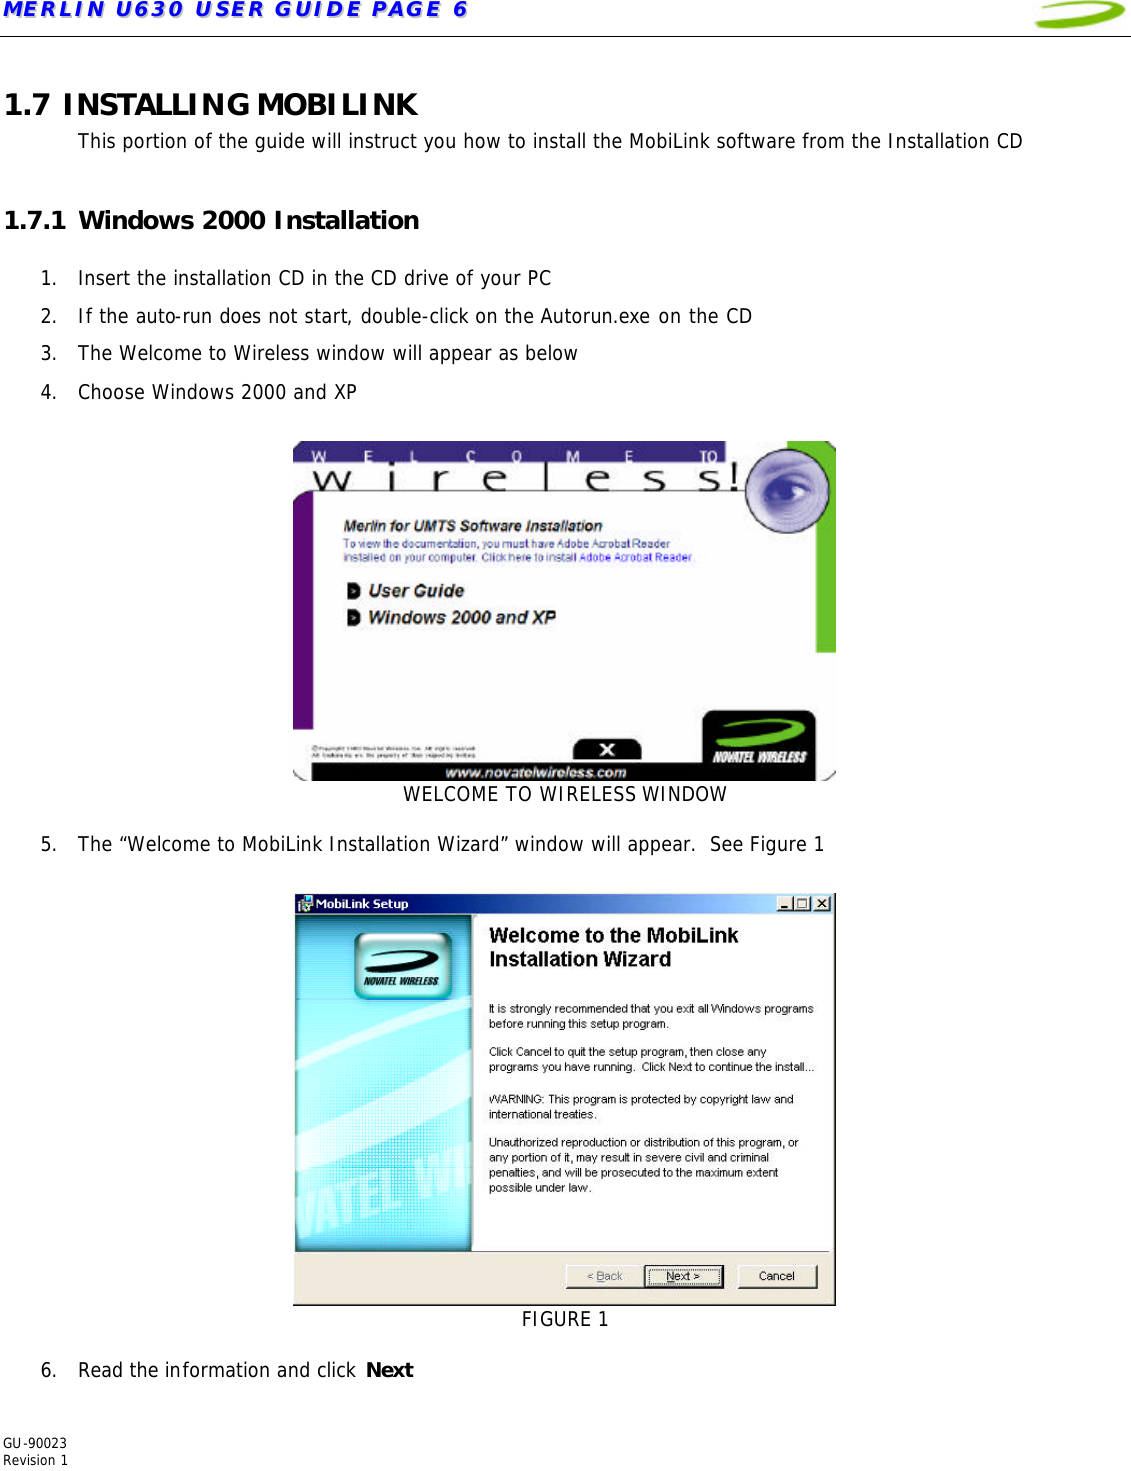 MMEERRLLIINN  UU663300  UUSSEERR  GGUUIIDDEE  PPAAGGEE  66   GU-90023  Revision 1  1.7 INSTALLING MOBILINK This portion of the guide will instruct you how to install the MobiLink software from the Installation CD  1.7.1 Windows 2000 Installation  1. Insert the installation CD in the CD drive of your PC 2. If the auto-run does not start, double-click on the Autorun.exe on the CD 3. The Welcome to Wireless window will appear as below   4. Choose Windows 2000 and XP   WELCOME TO WIRELESS WINDOW  5. The “Welcome to MobiLink Installation Wizard” window will appear.  See Figure 1   FIGURE 1  6. Read the information and click Next 